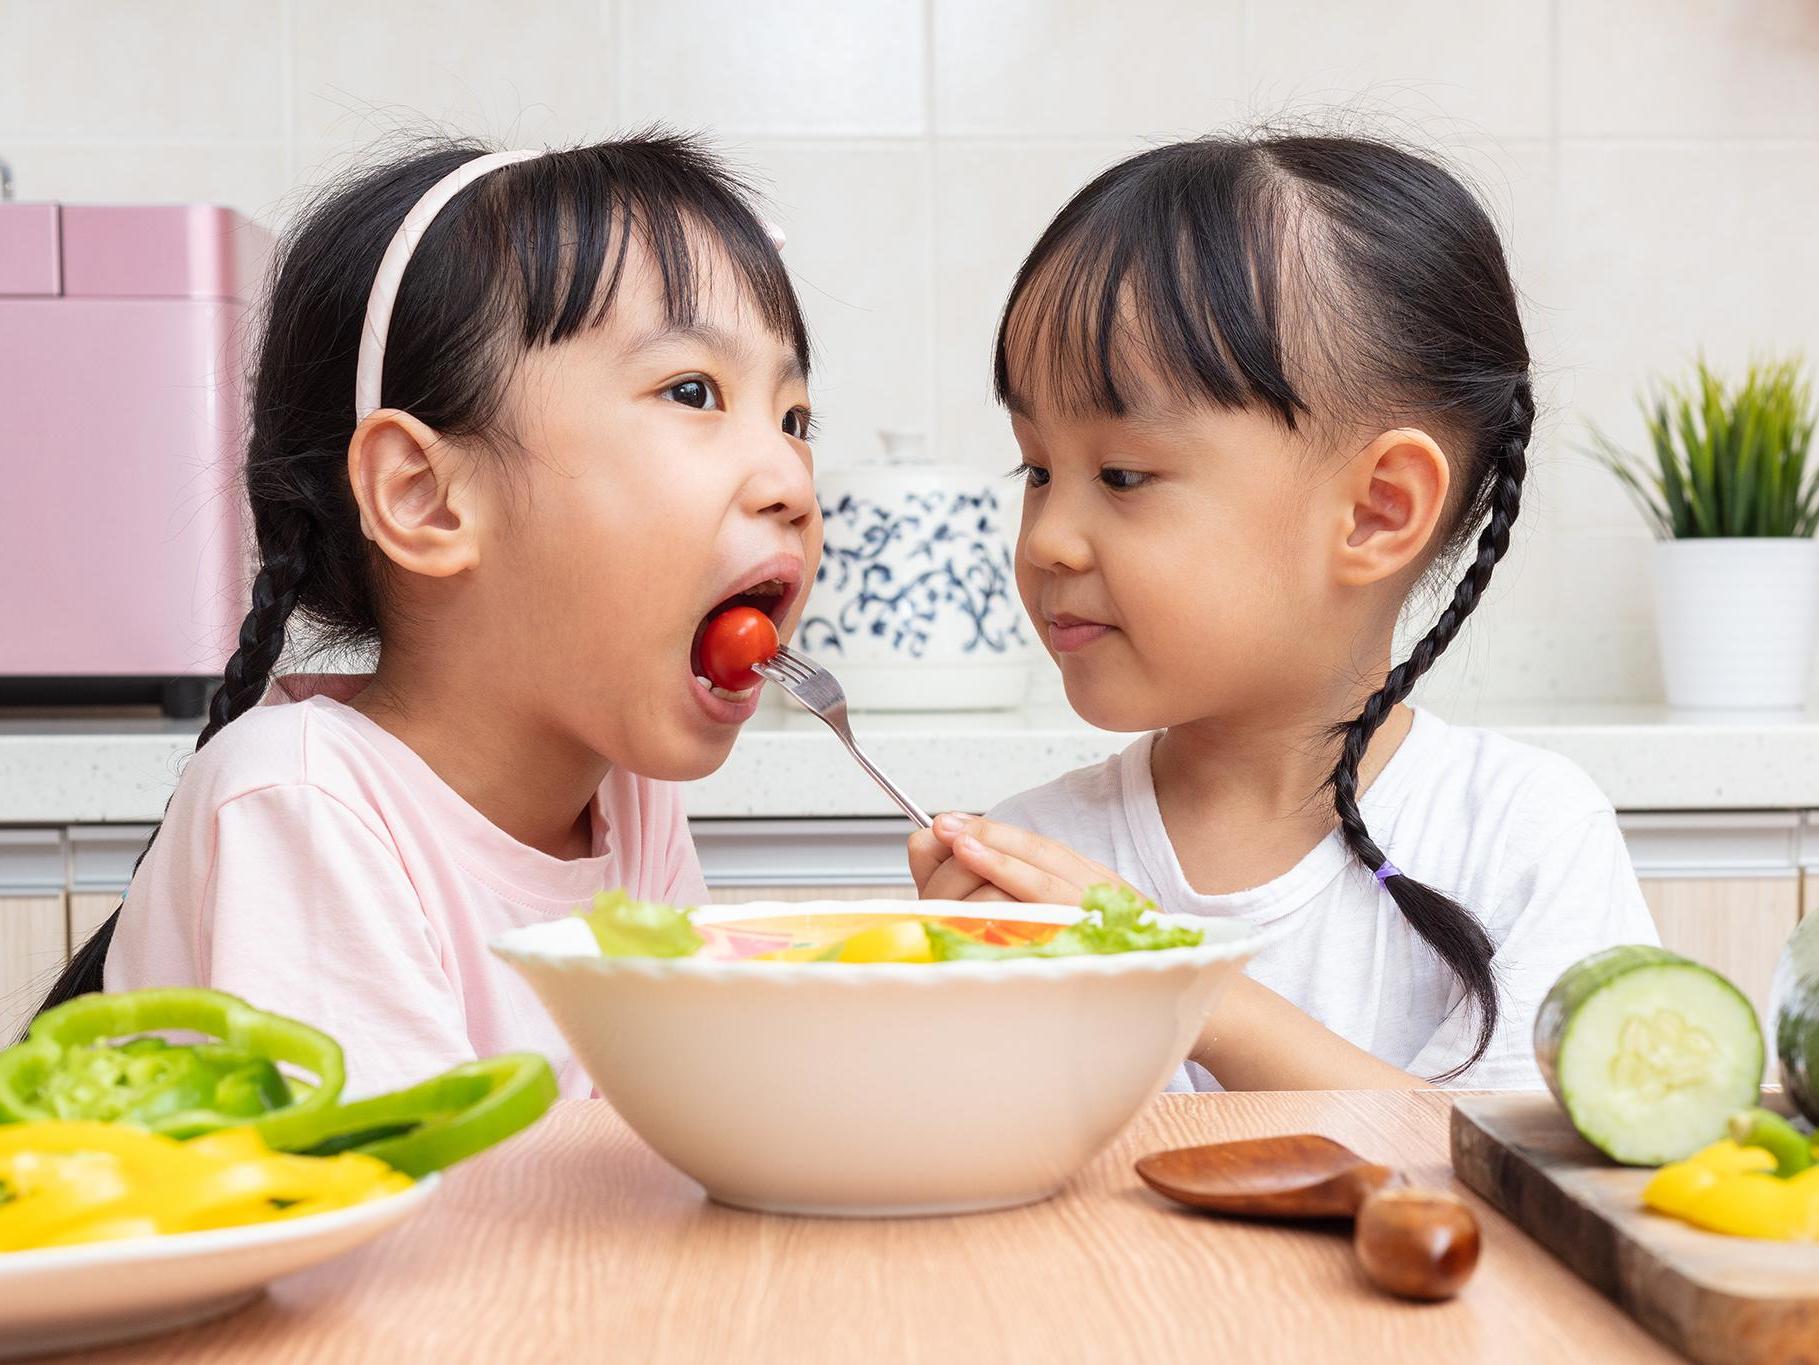 Study claims children are more likely to share food than adults